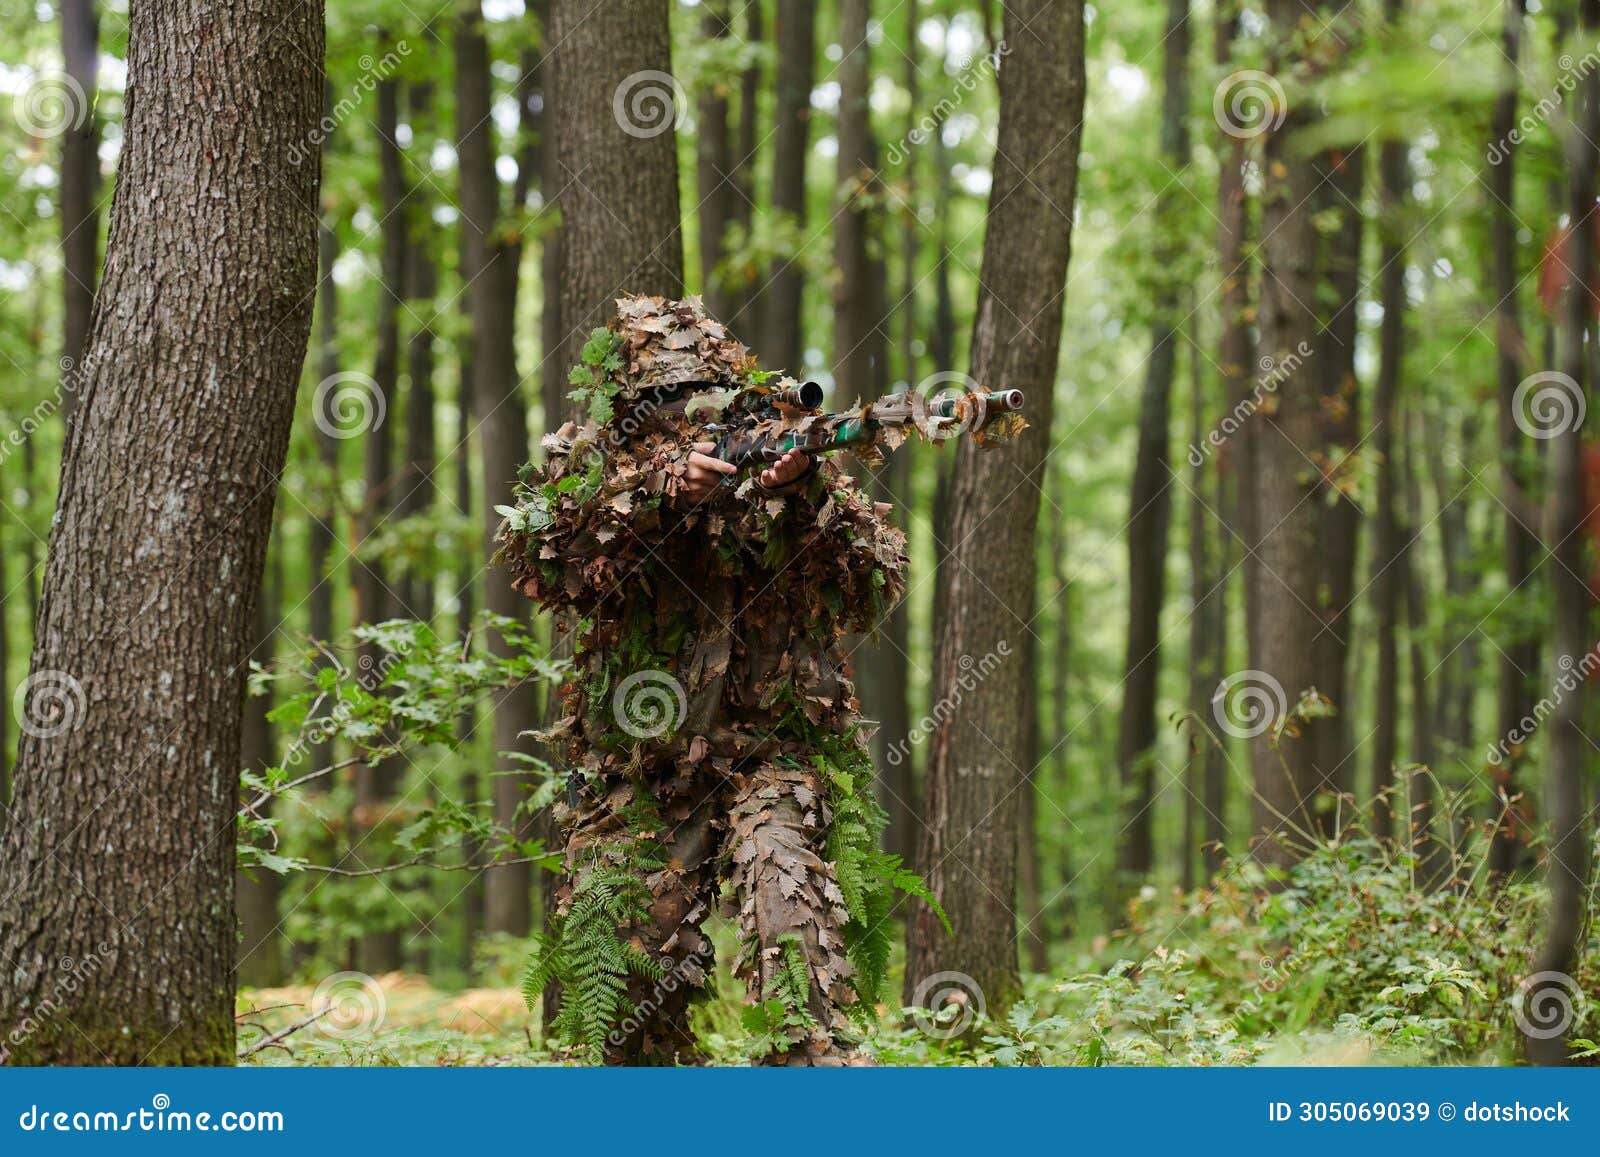 a highly skilled elite sniper, camouflaged in the dense forest, stealthily maneuvers through dangerous woodland terrain